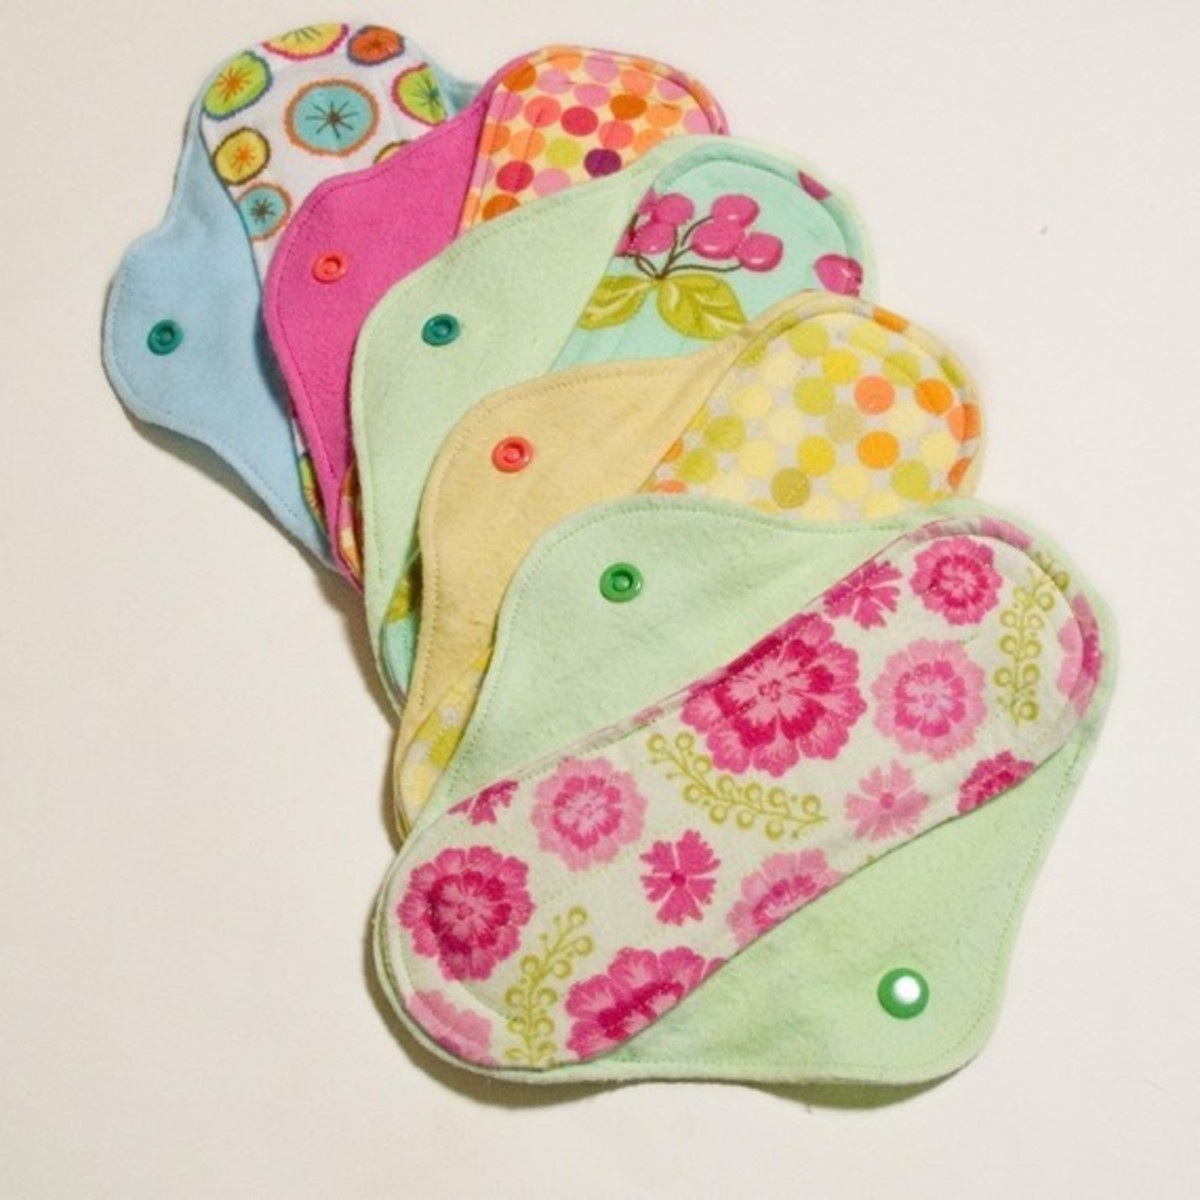 CUSTOM Made to Order Cloth Menstrual Pad Baby Fawks Pink Space OBV